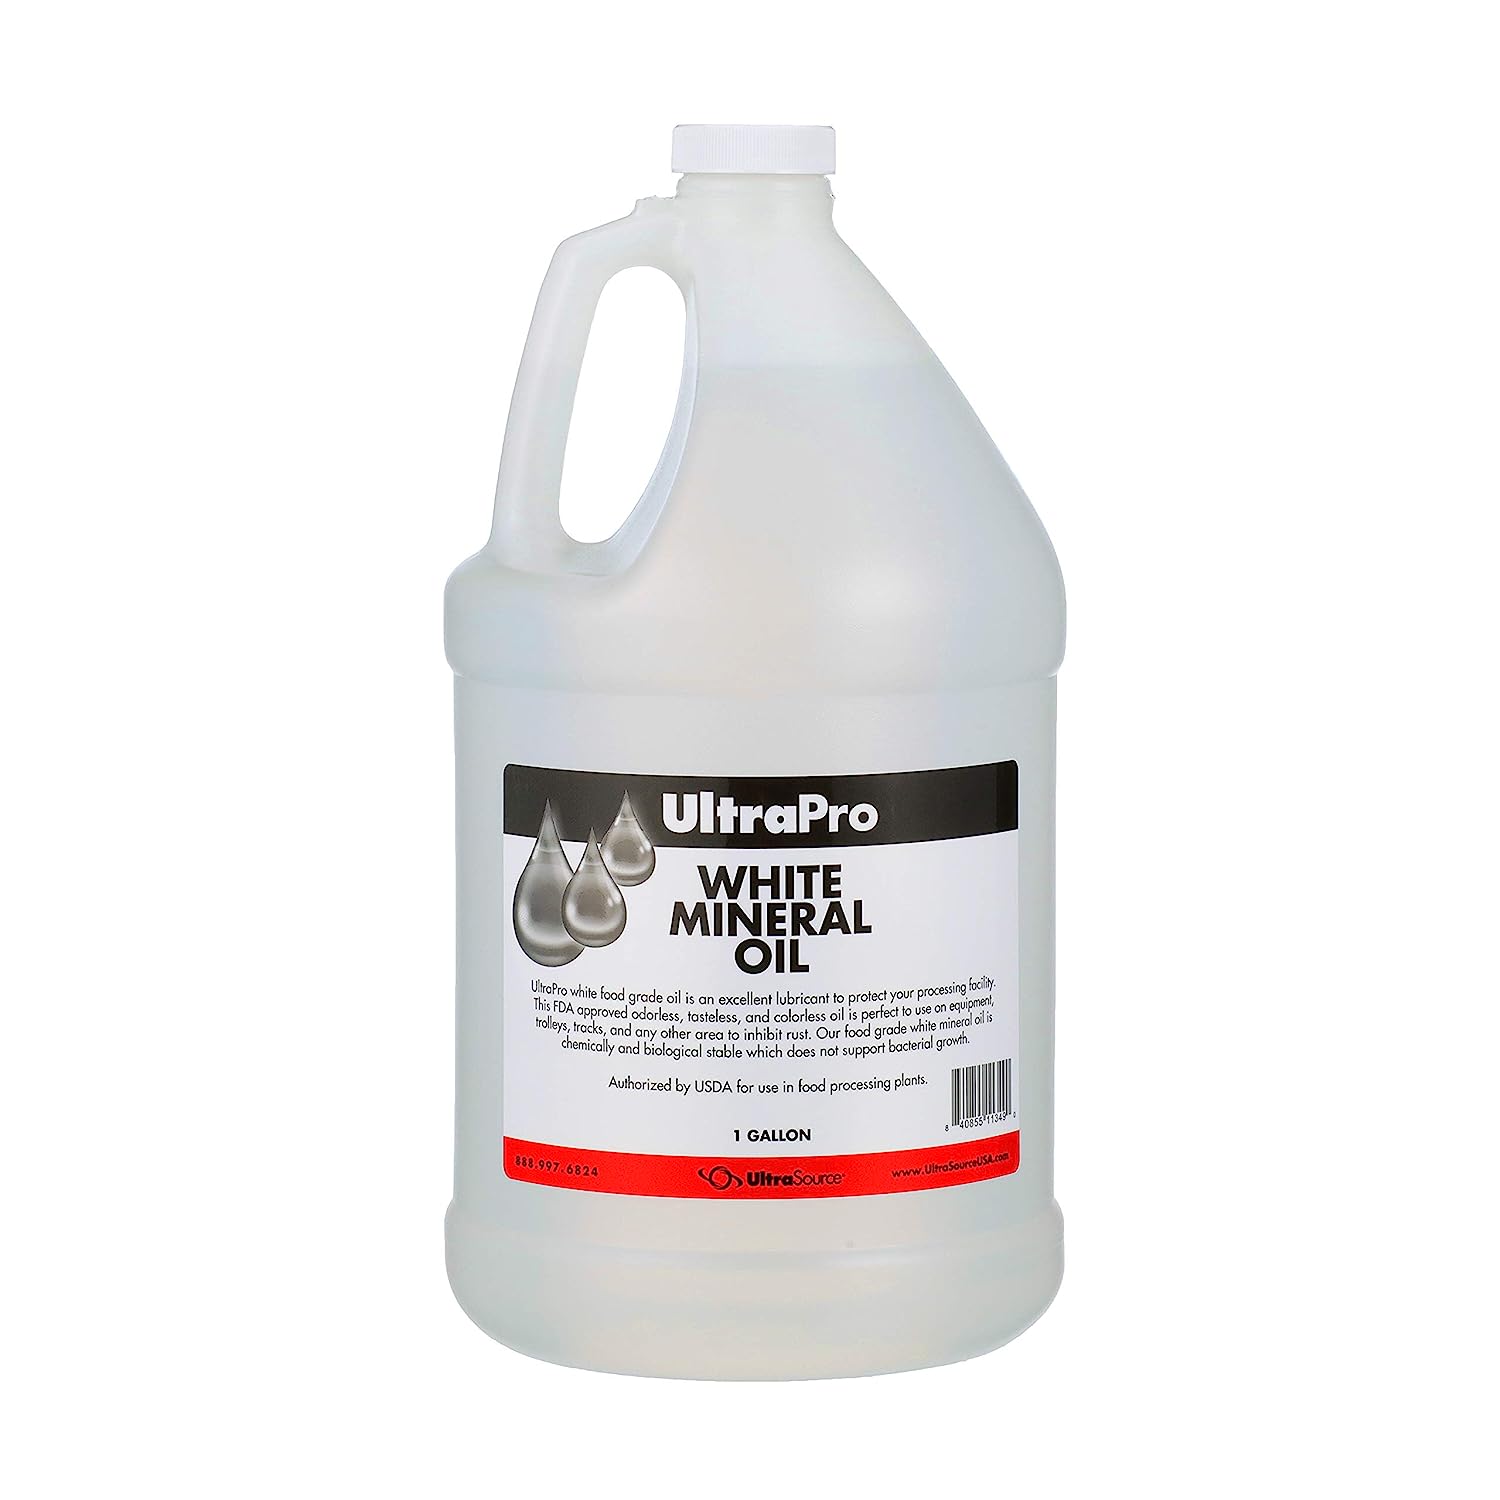 UltraPro Food Grade Mineral Oil for Lubricating and Protecting Cutting Board, Butcher Block, Stainless Steel, Knife, Tool, Machine and Equipment (1 Gallon)